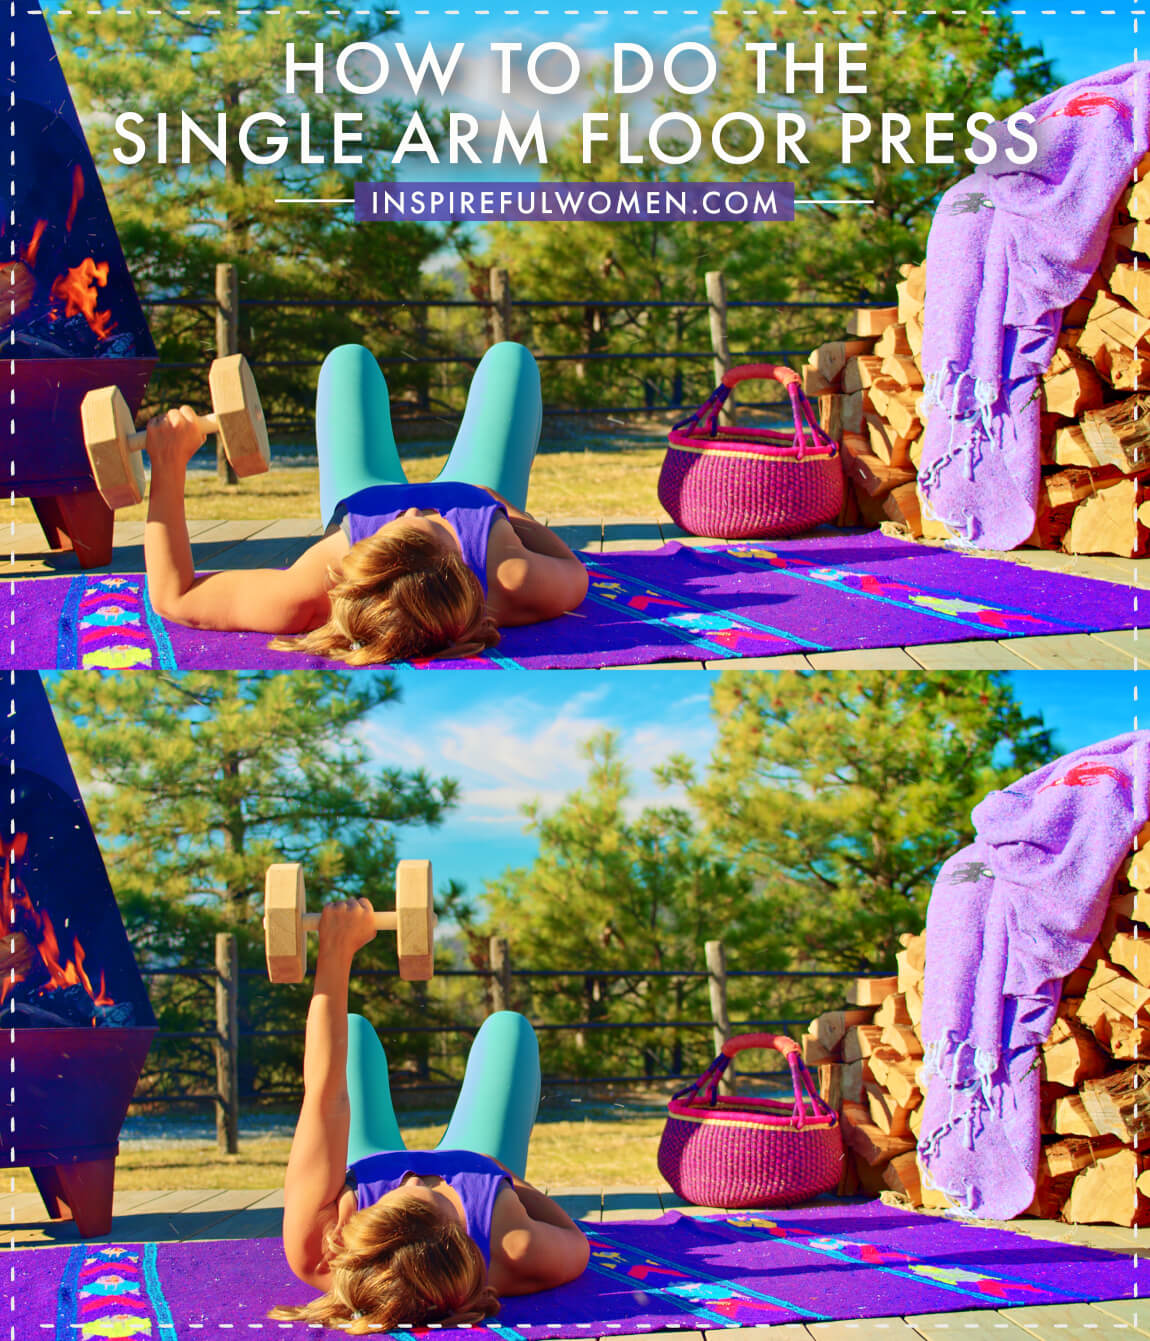 how-to-do-one-single-arm-floor-chest-press-exercise-training-at-home-female-above-40